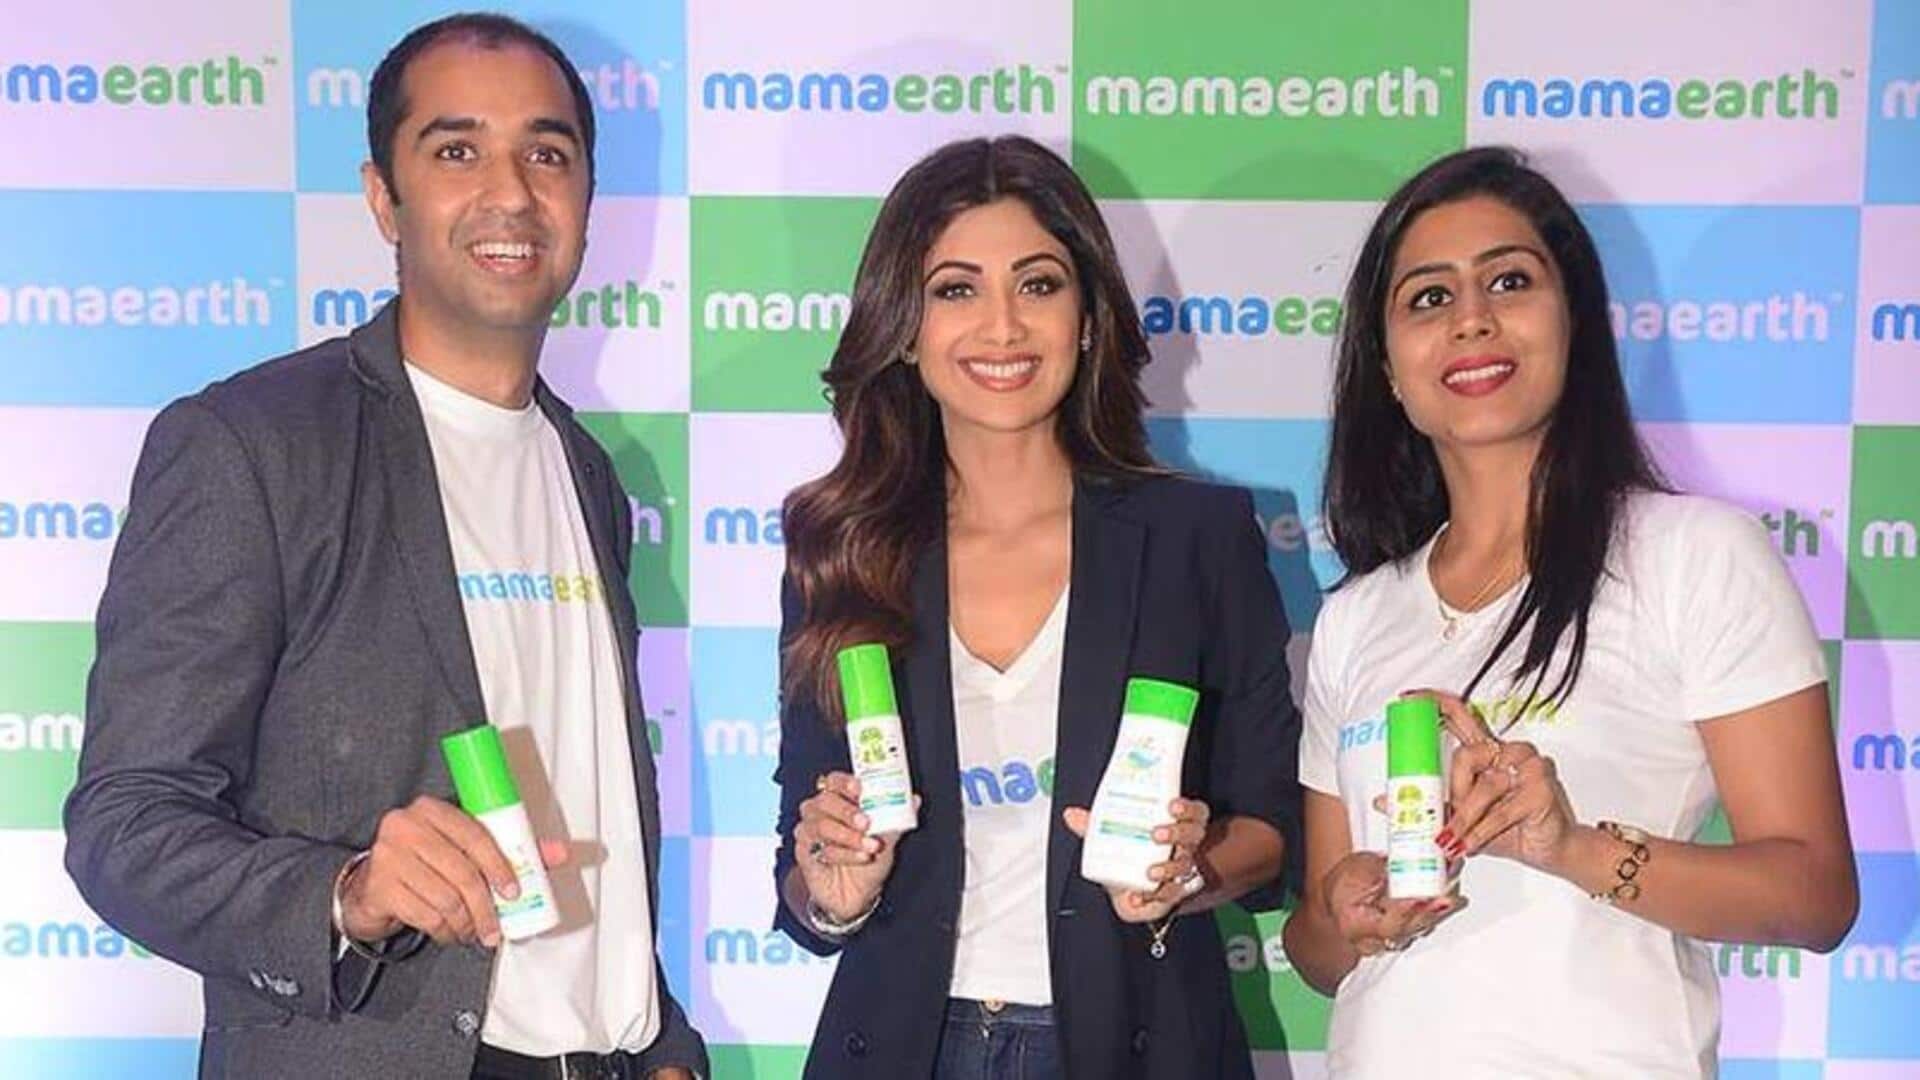 Mamaearth's parent company hits new peak as shares surge 20%